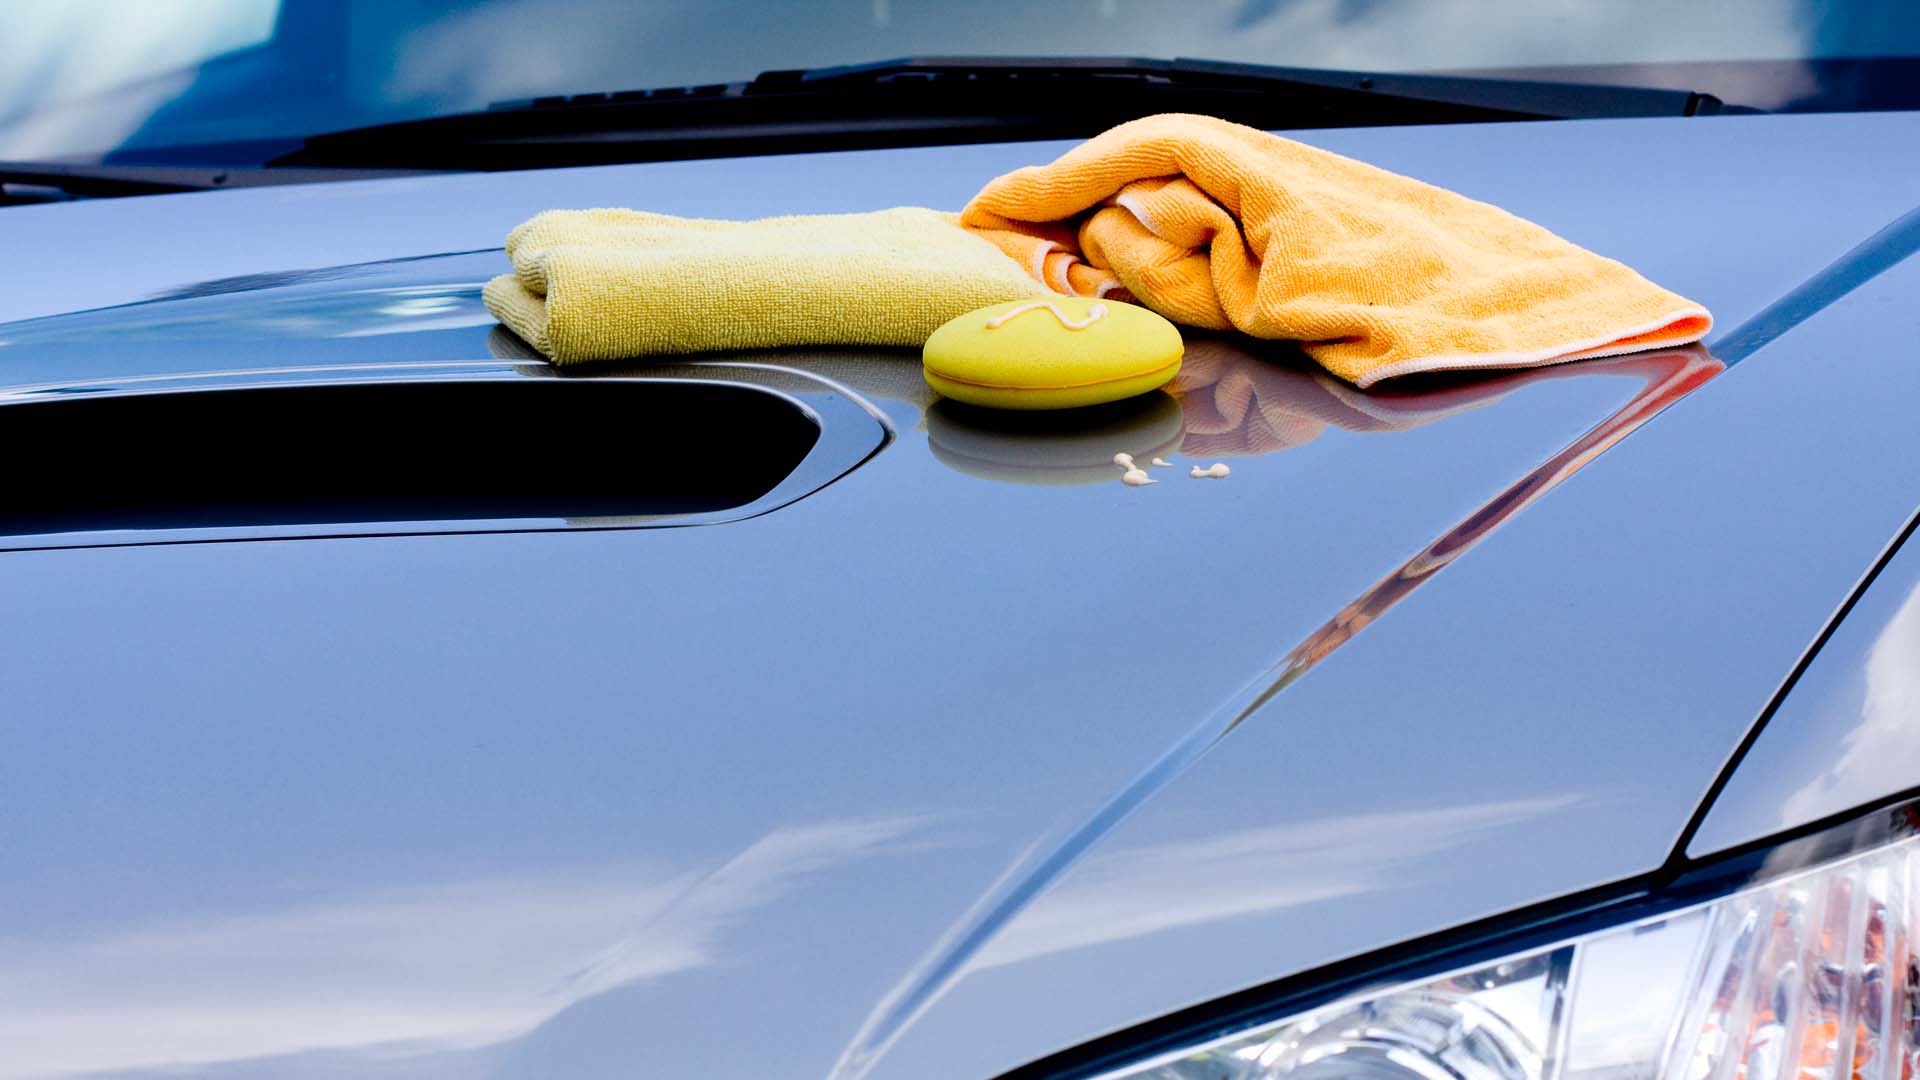 How to Wax a Car Using Hair Conditioner